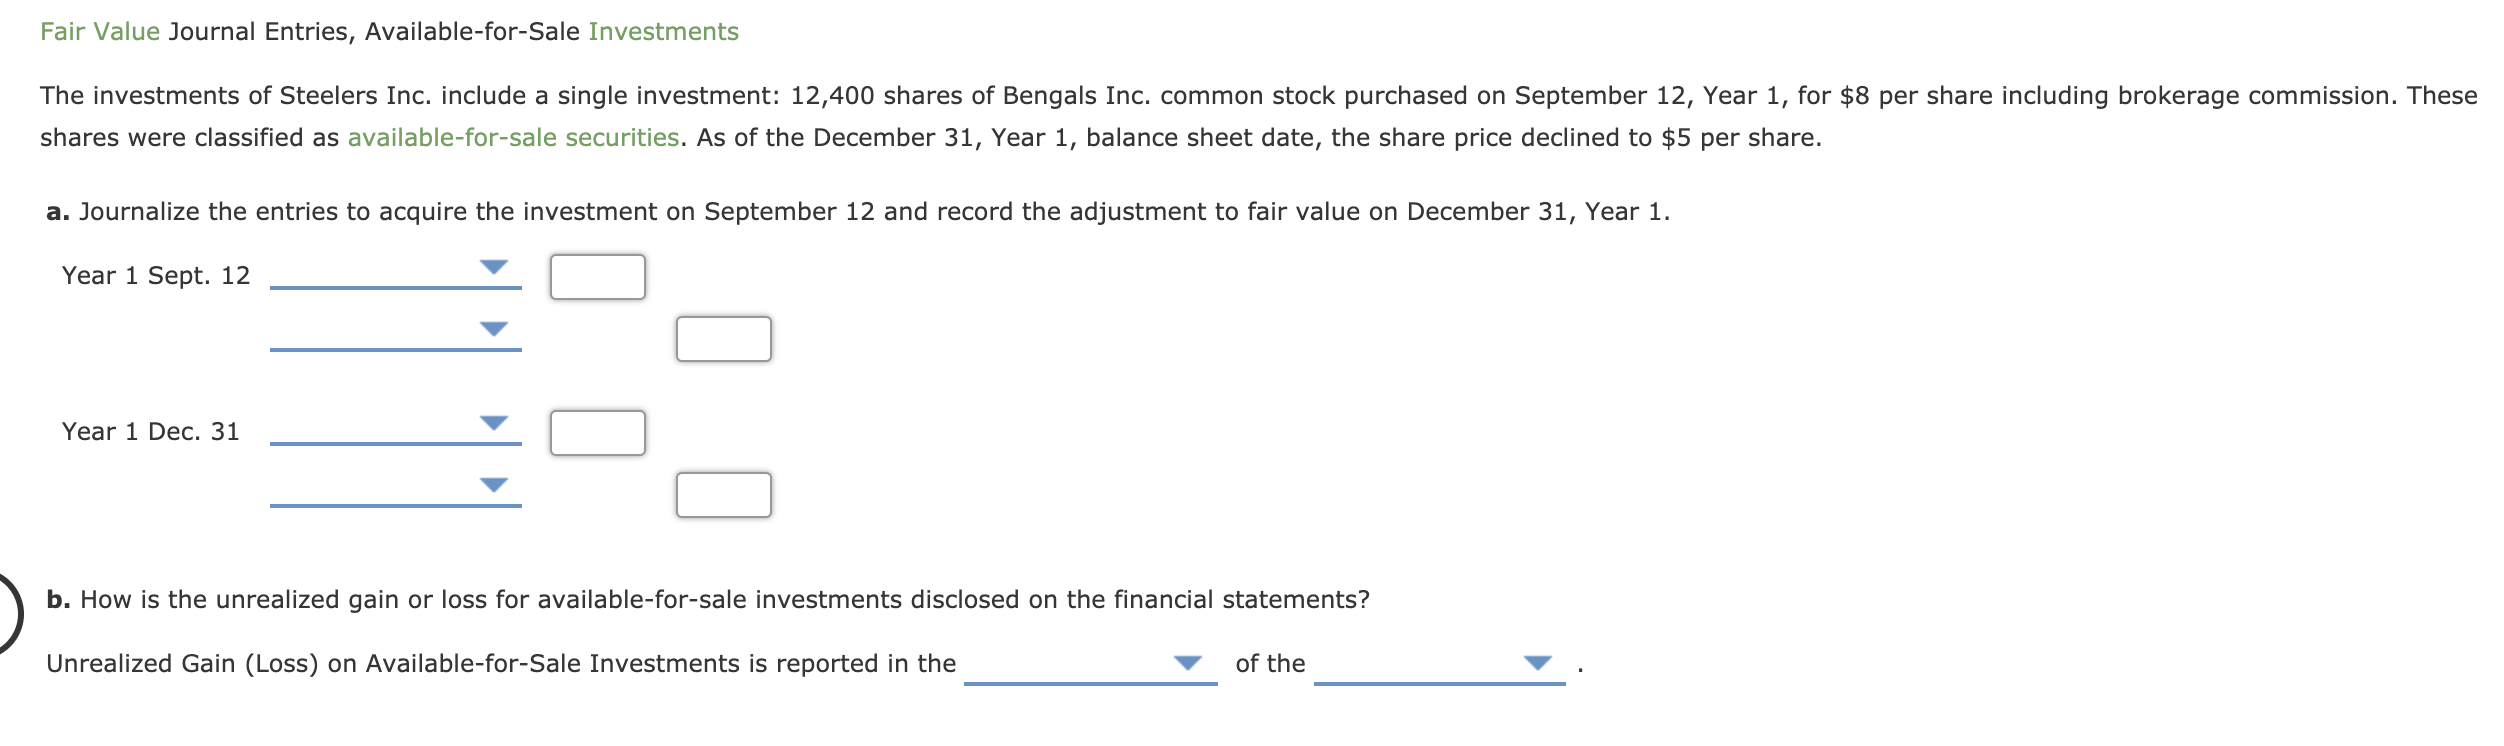 The investments of Steelers Inc. include a single investment: 12,400 shares of Bengals Inc. common stock purchased on September 12, Year 1, for $8 per share including brokerage commission. These
shares were classified as available-for-sale securities. As of the December 31, Year 1, balance sheet date, the share price declined to $5 per share.
a. Journalize the entries to acquire the investment on September 12 and record the adjustment to fair value on December 31, Year 1.
Year 1 Sept. 12
Year 1 Dec. 31
b. How is the unrealized gain or loss for available-for-sale investments disclosed on the financial statements?
Unrealized Gain (Loss) on Available-for-Sale Investments is reported in the
of the
